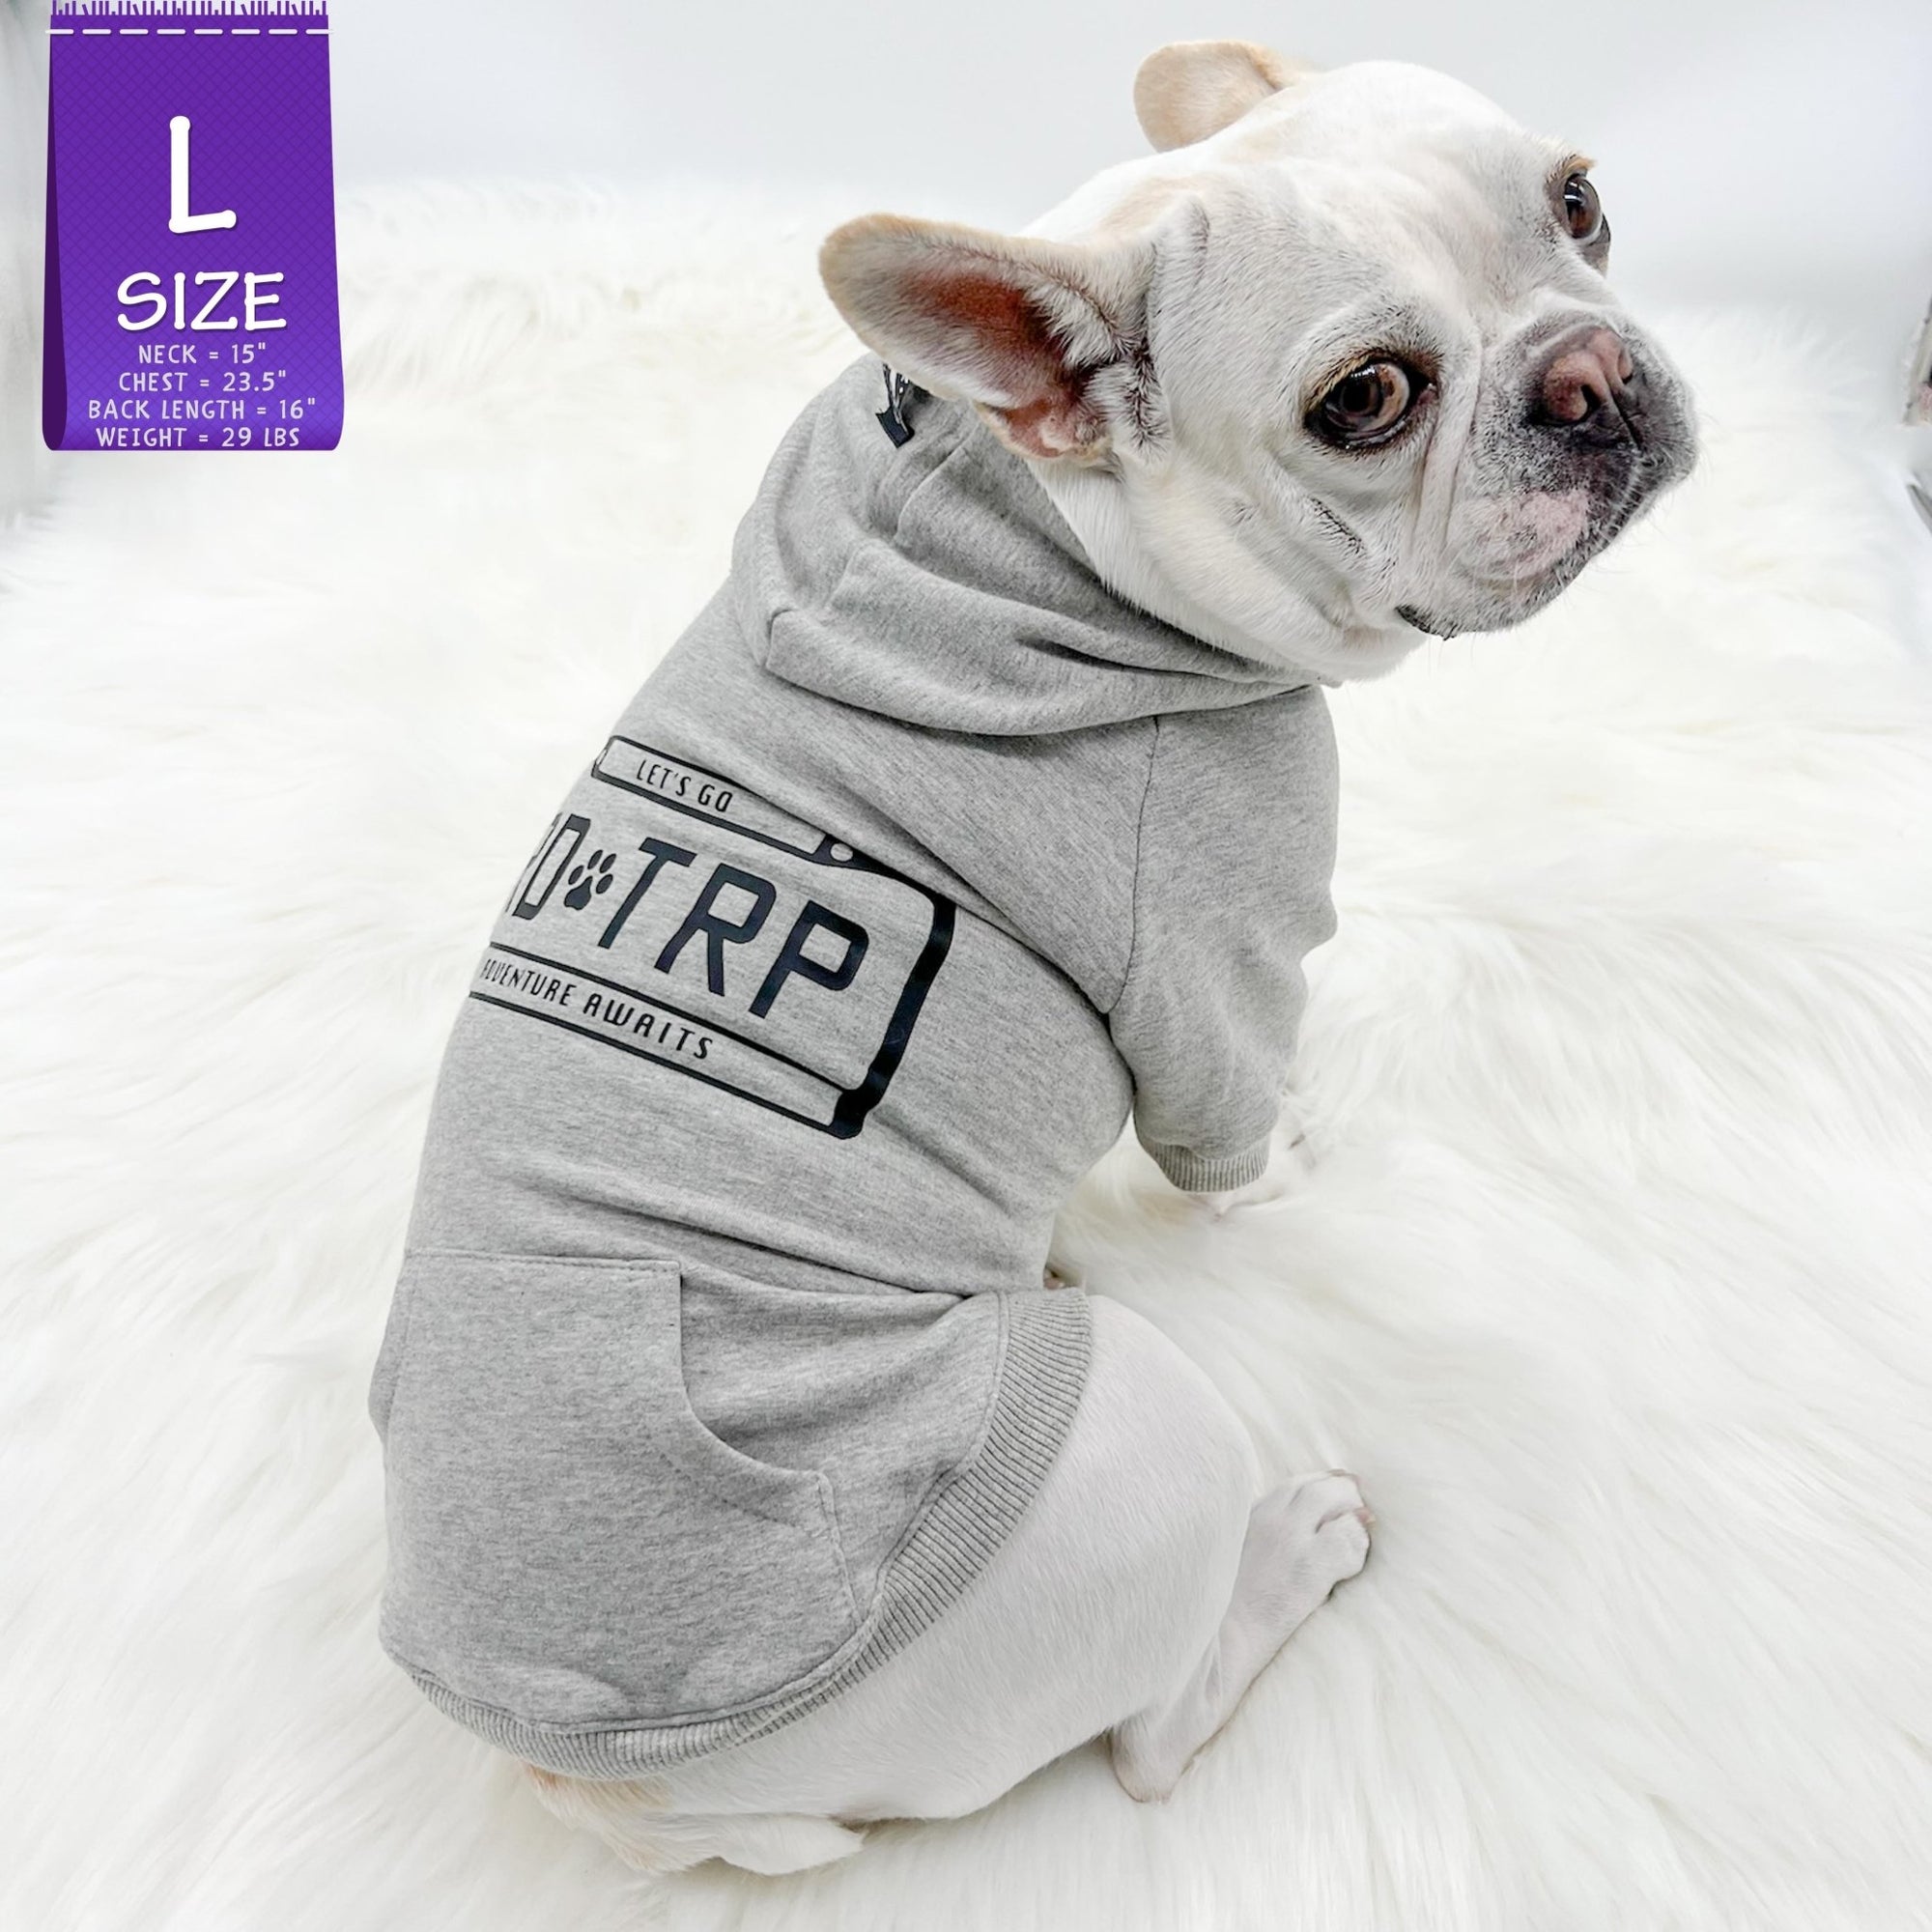 Dog Hoodie - Hoodies For Dogs - French Bulldog wearing &quot;Road Trip&quot; License Plate design in gray &amp; black sets - back view against solid white background - Wag Trendz